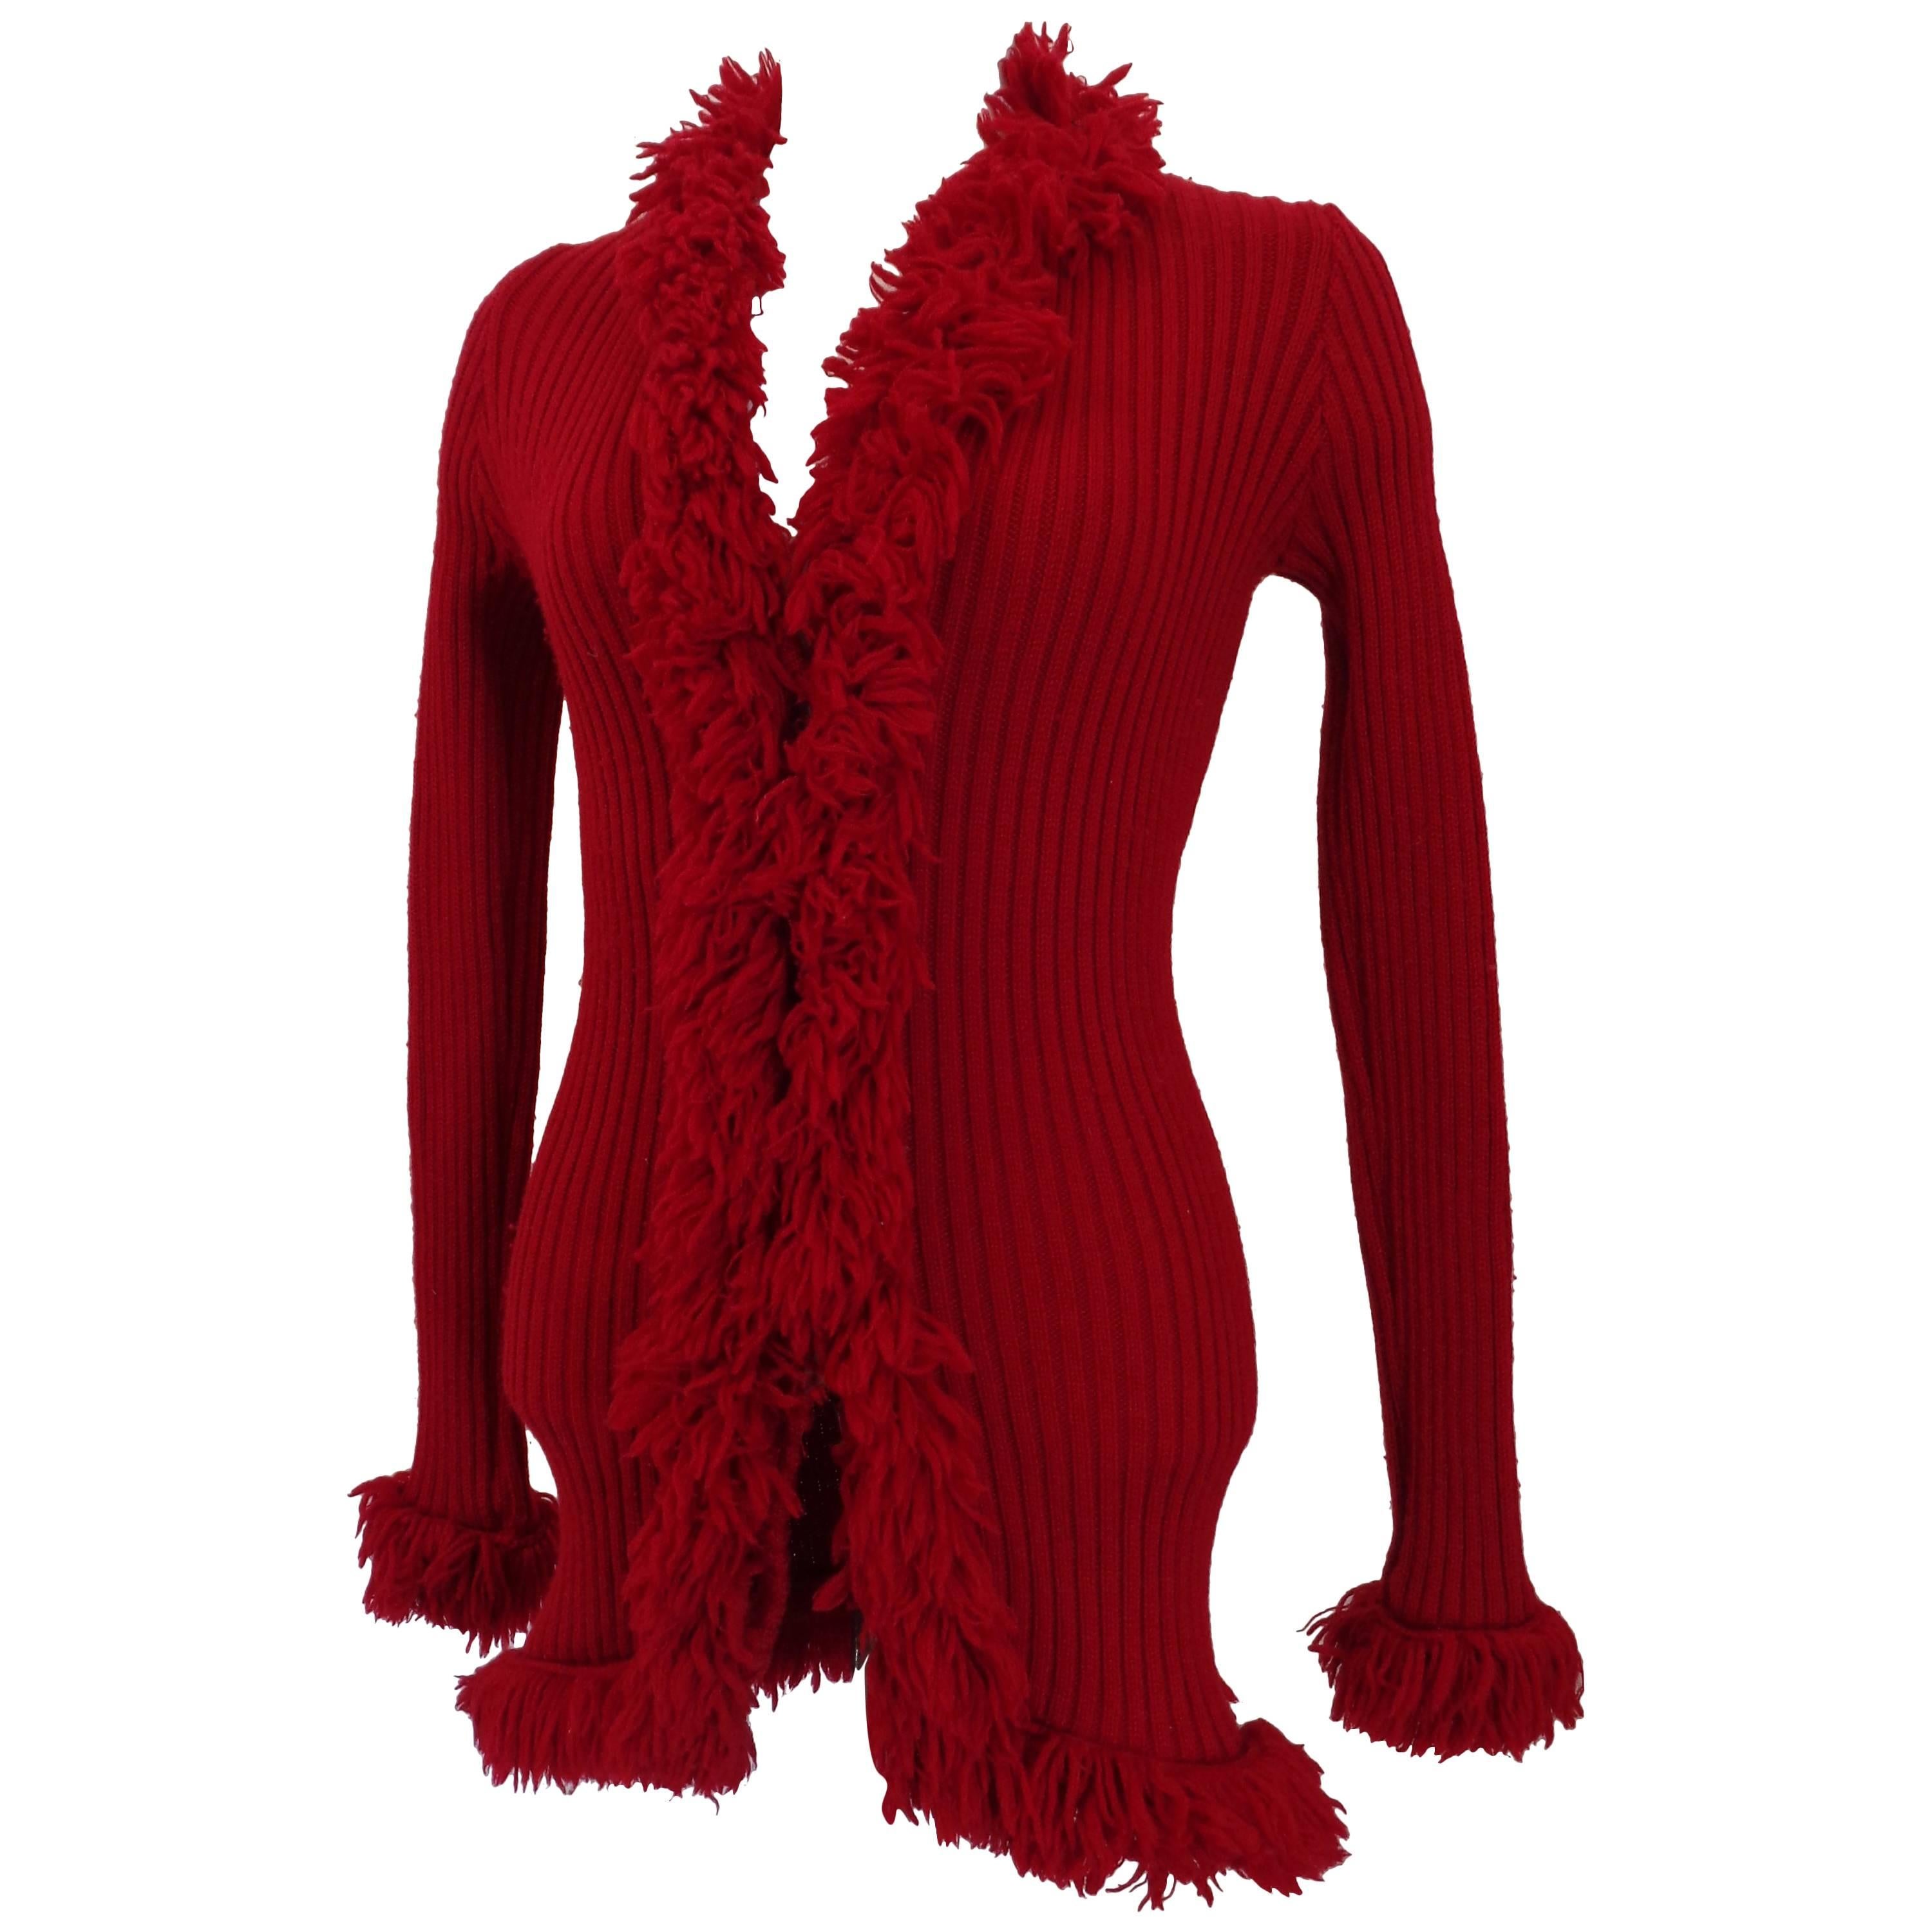 Yves Saint Laurent Tricot Red Cardigan Sweater